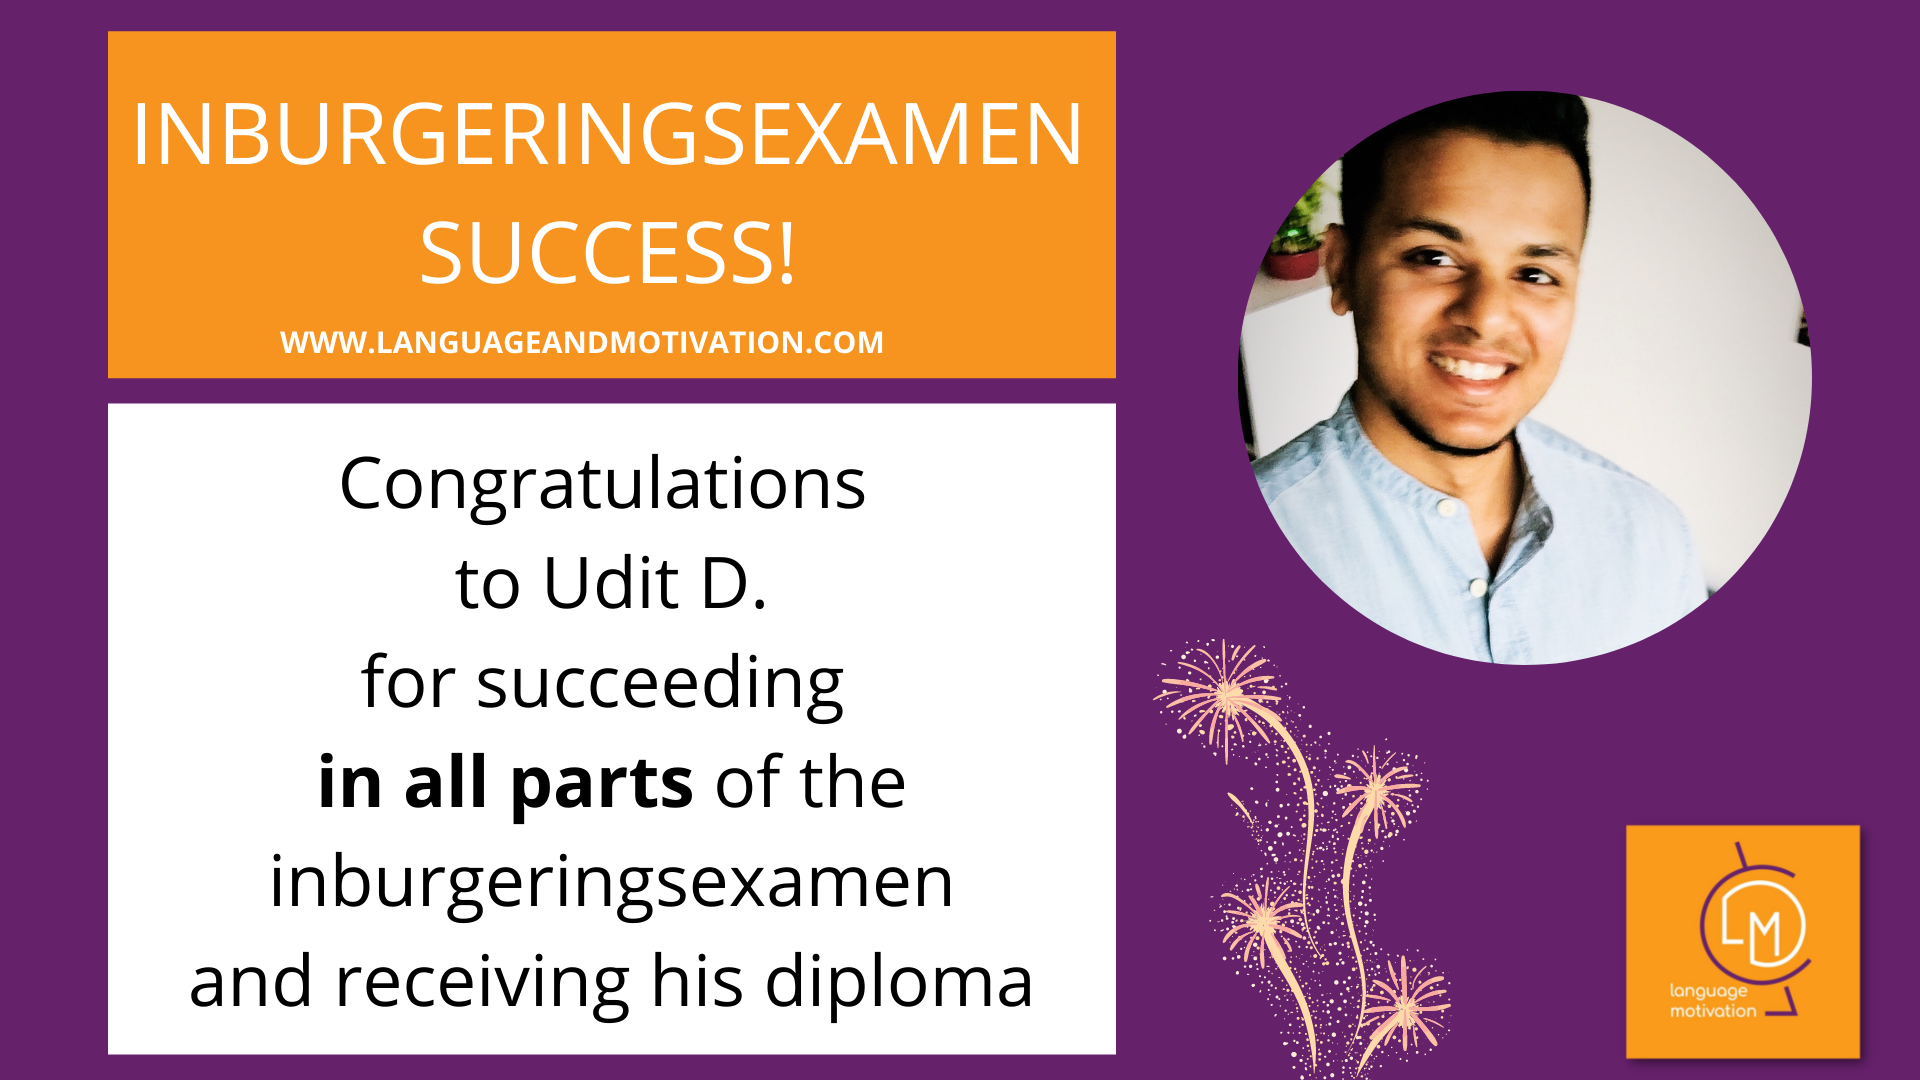 Congratulations to Udit D. for succeeding in all parts of #inburgeringsdiploma